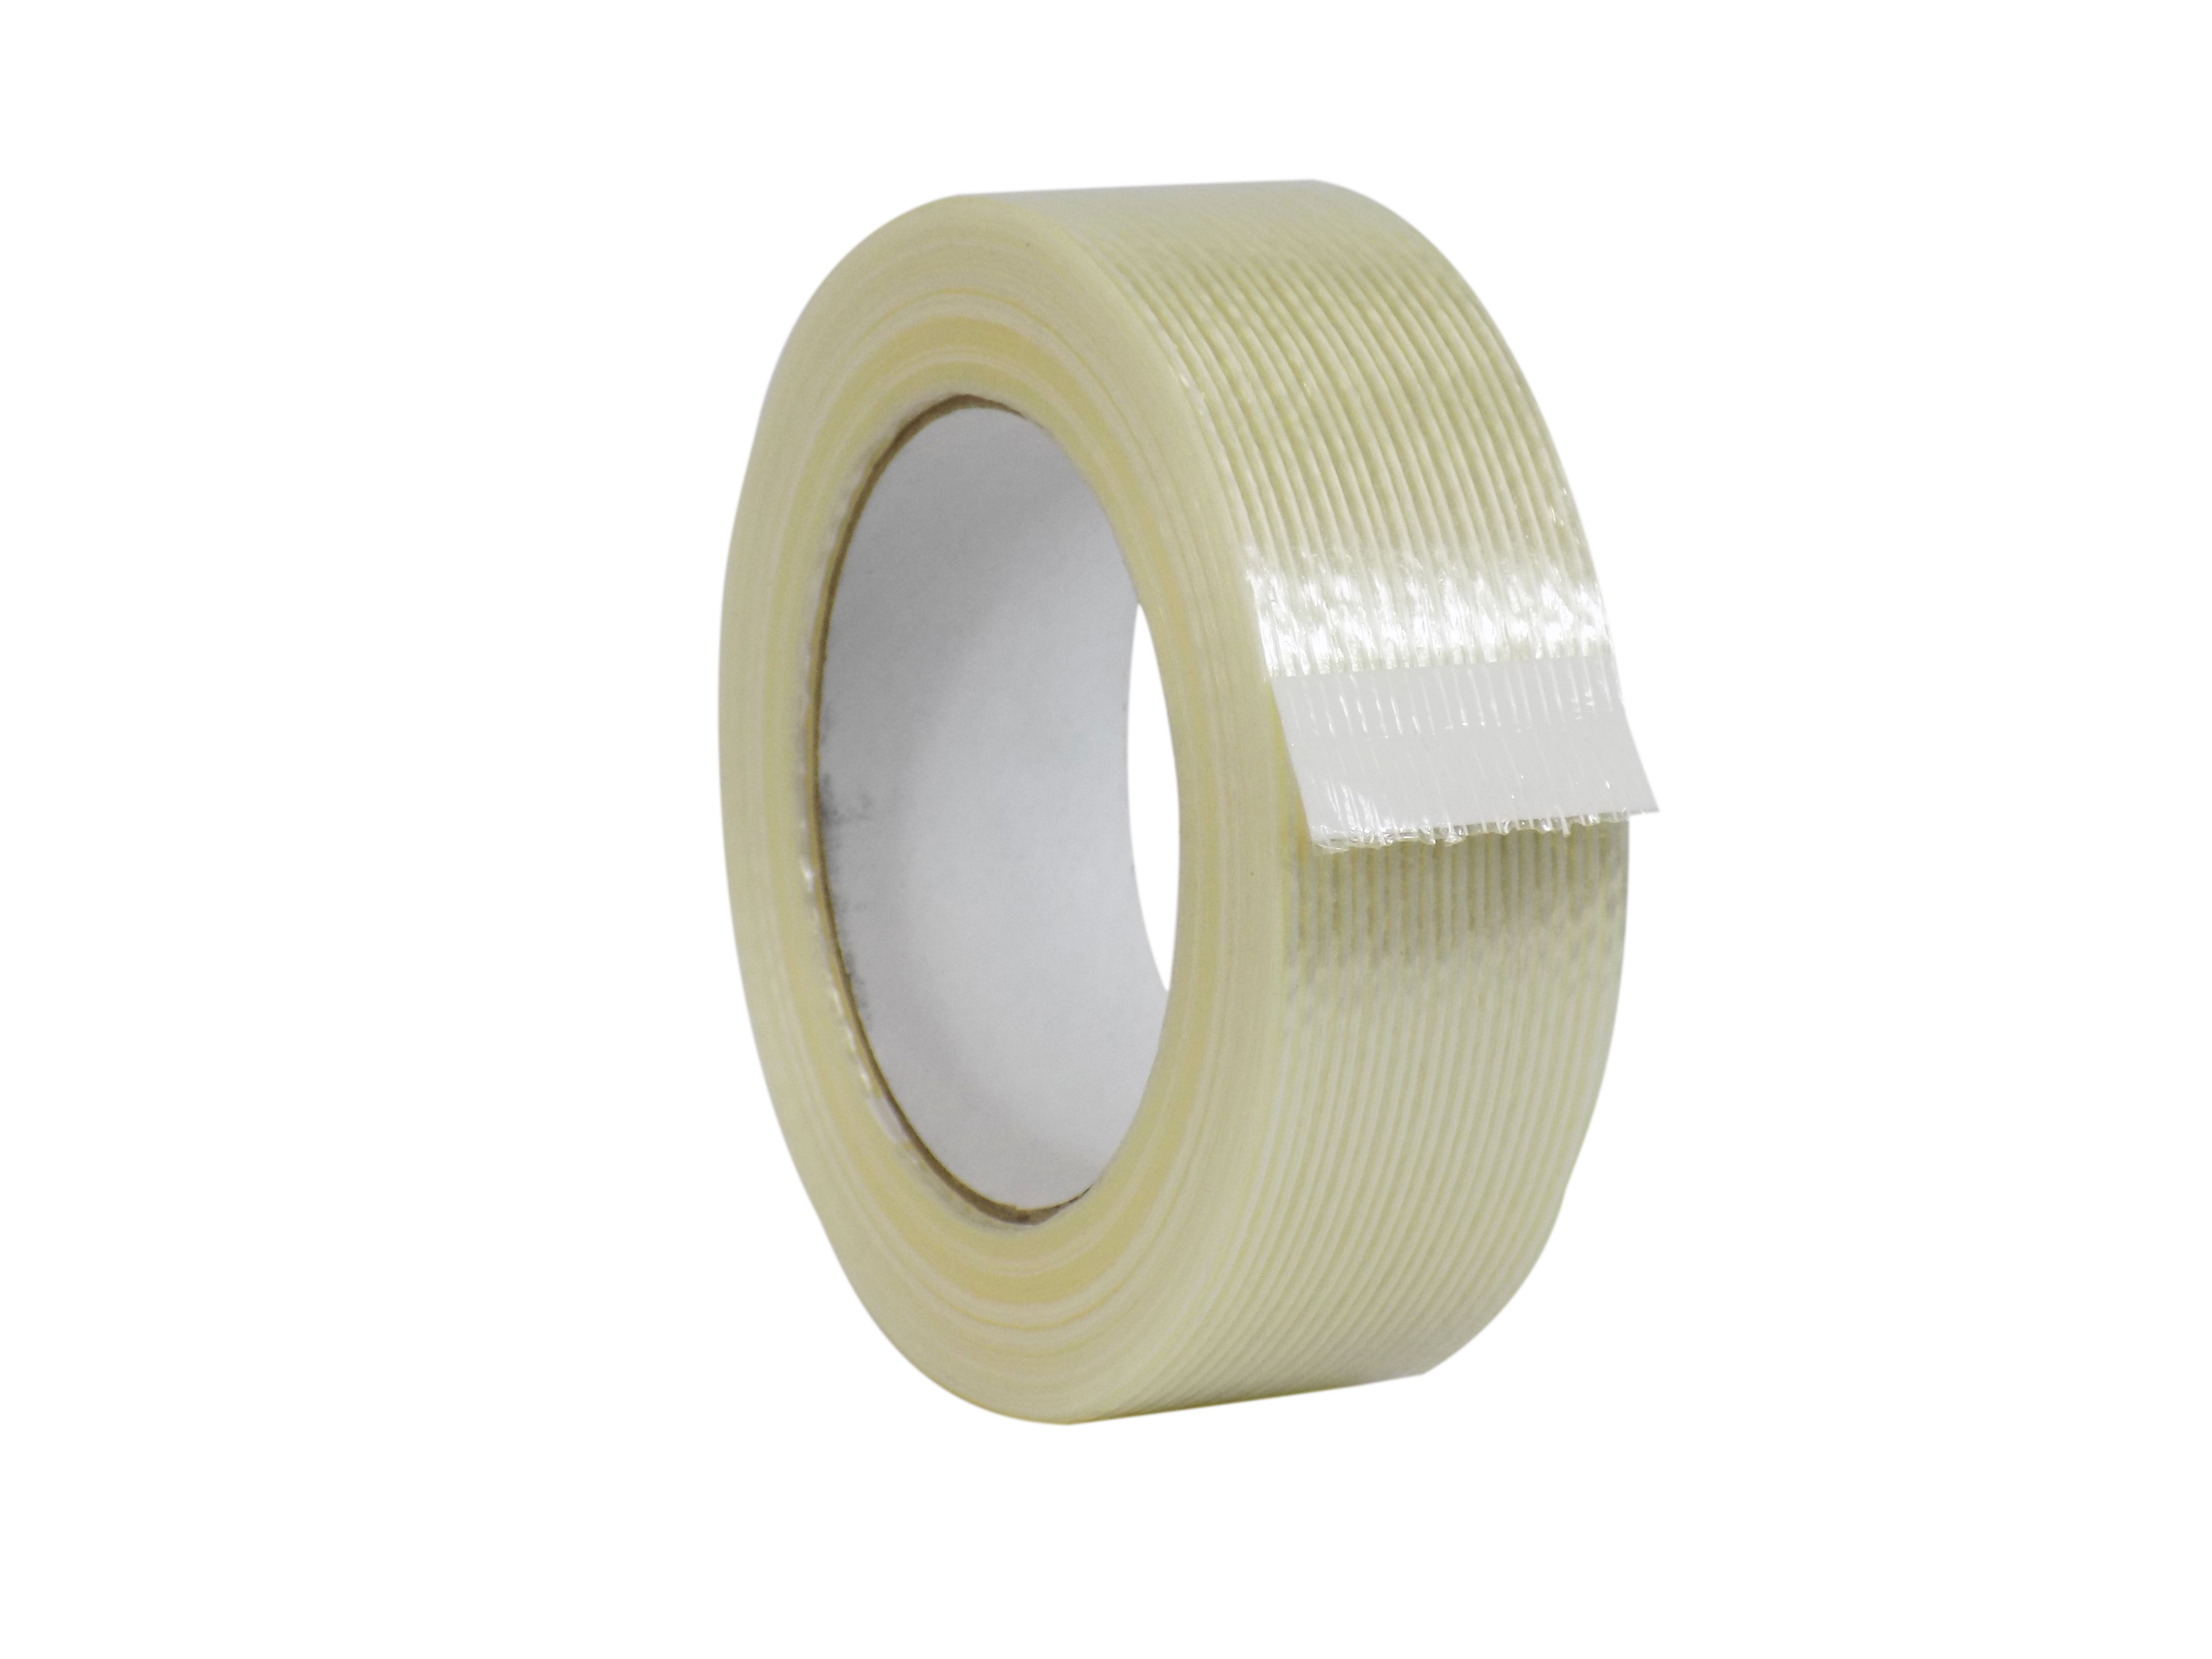 Pack of 1 Filaments Run Lengthwise 1/2 in MAT Commodity Grade Fiberglass Reinforced Filament Strapping Tape Wide x 60 yds. 